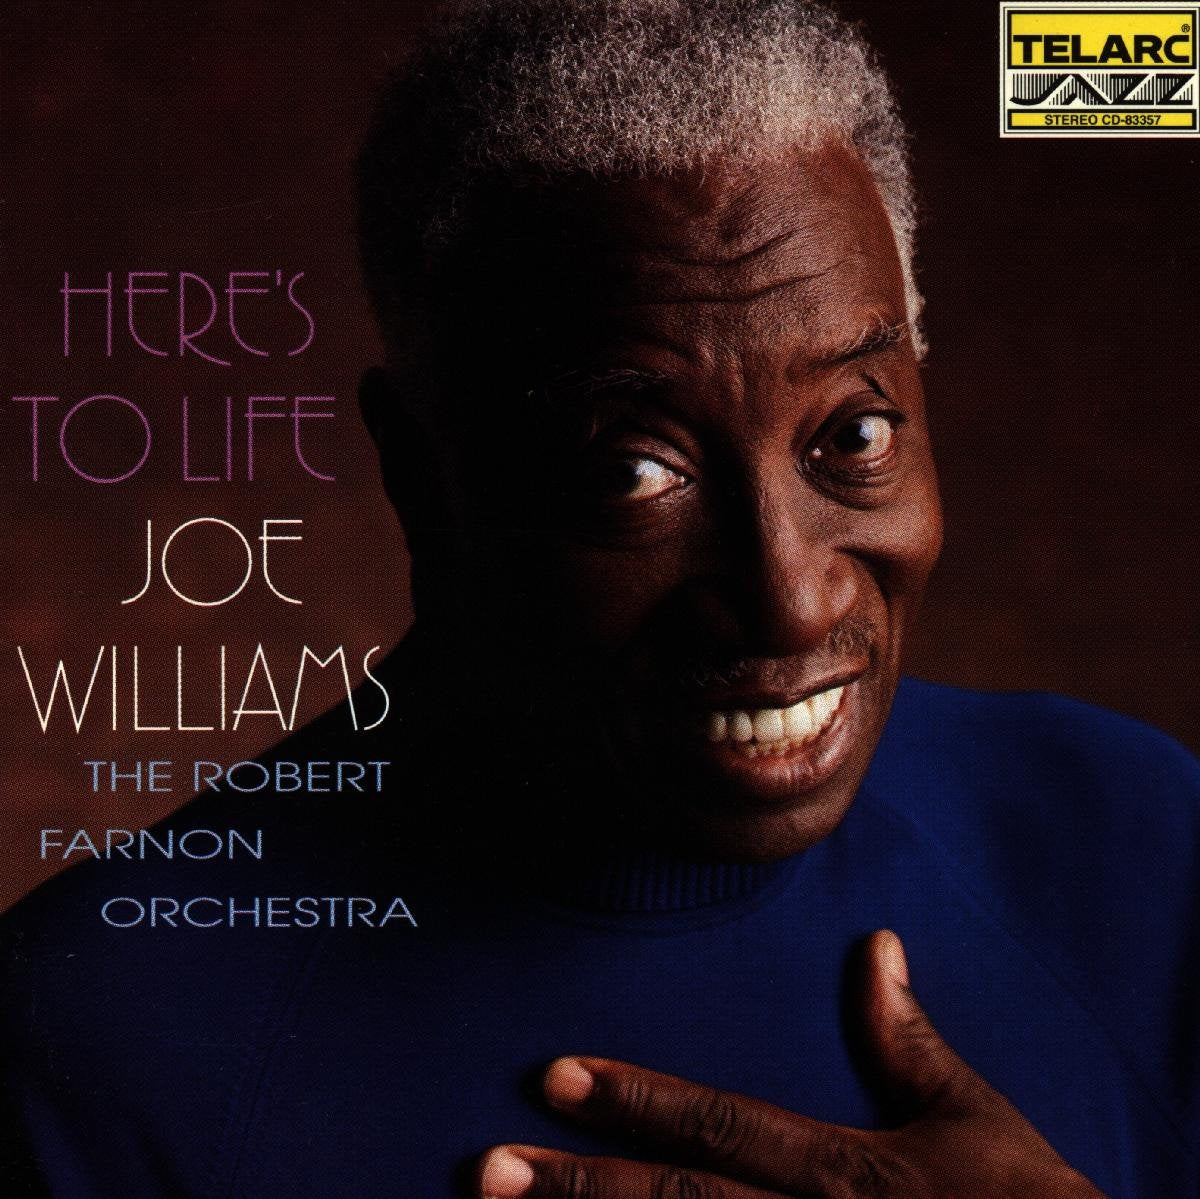 JOE WILLIAMS: HERE'S TO LIFE - Ballads for Orchestra